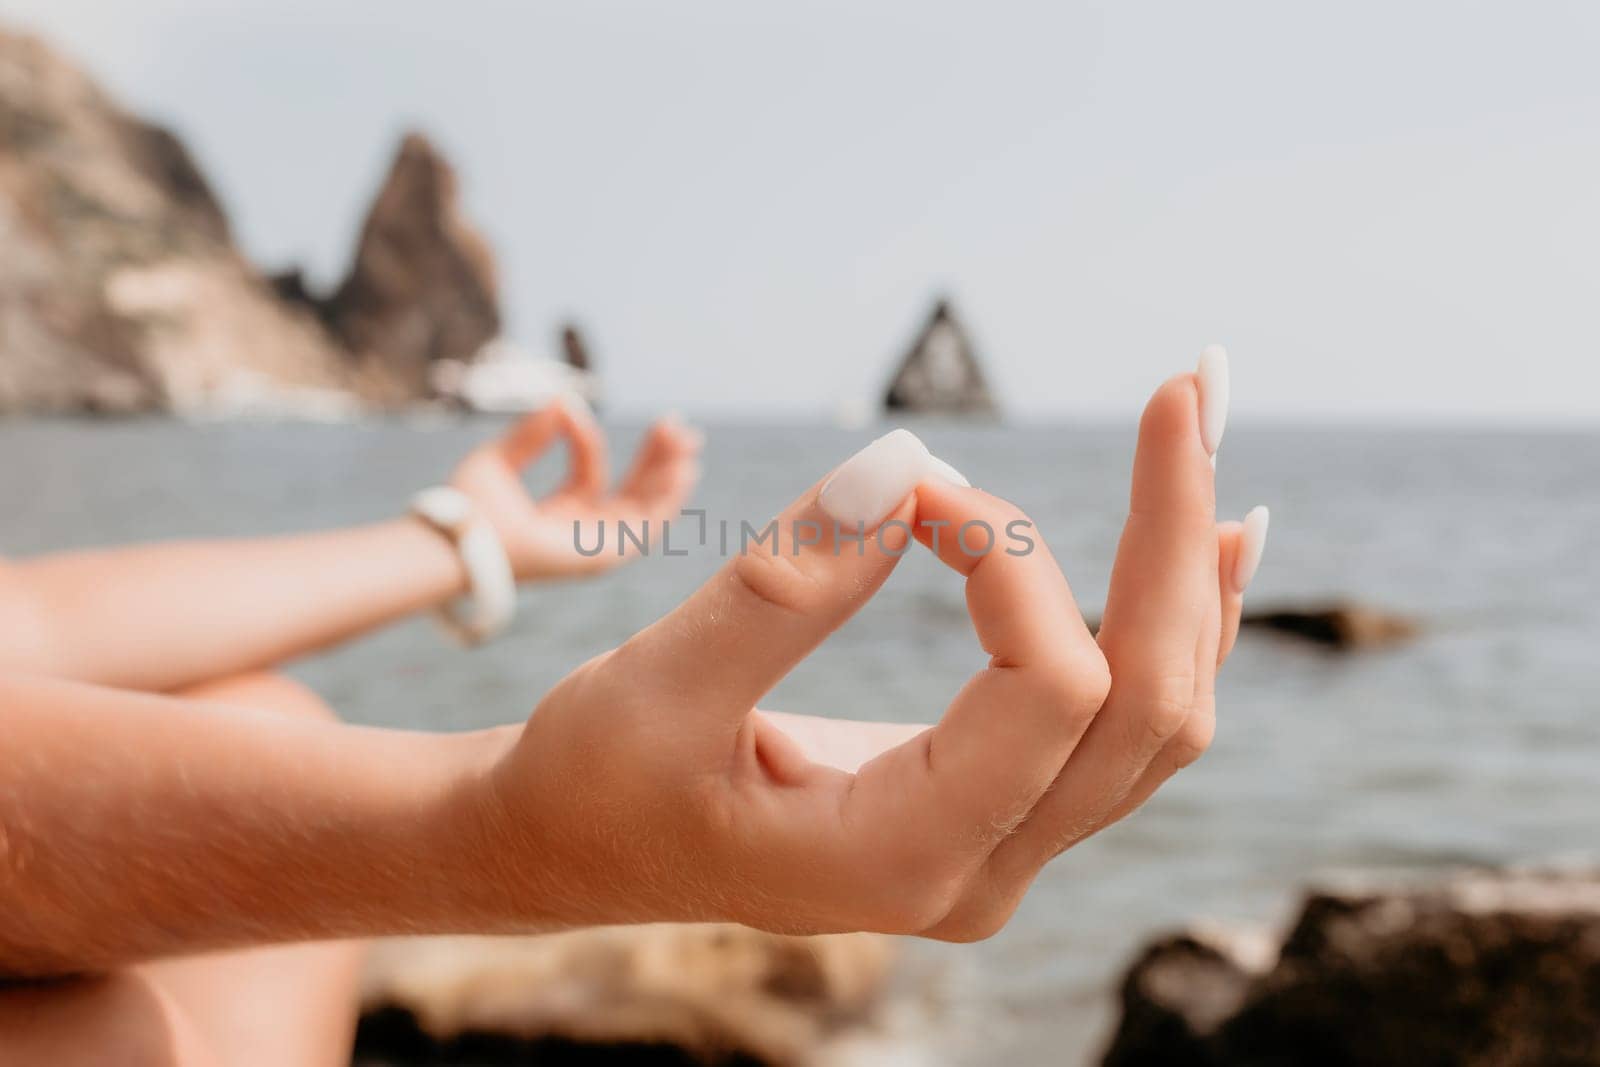 Woman sea yoga. Happy woman meditating in yoga pose on the beach, ocean and rock mountains. Motivation and inspirational fit and exercising. Healthy lifestyle outdoors in nature, fitness concept. by panophotograph